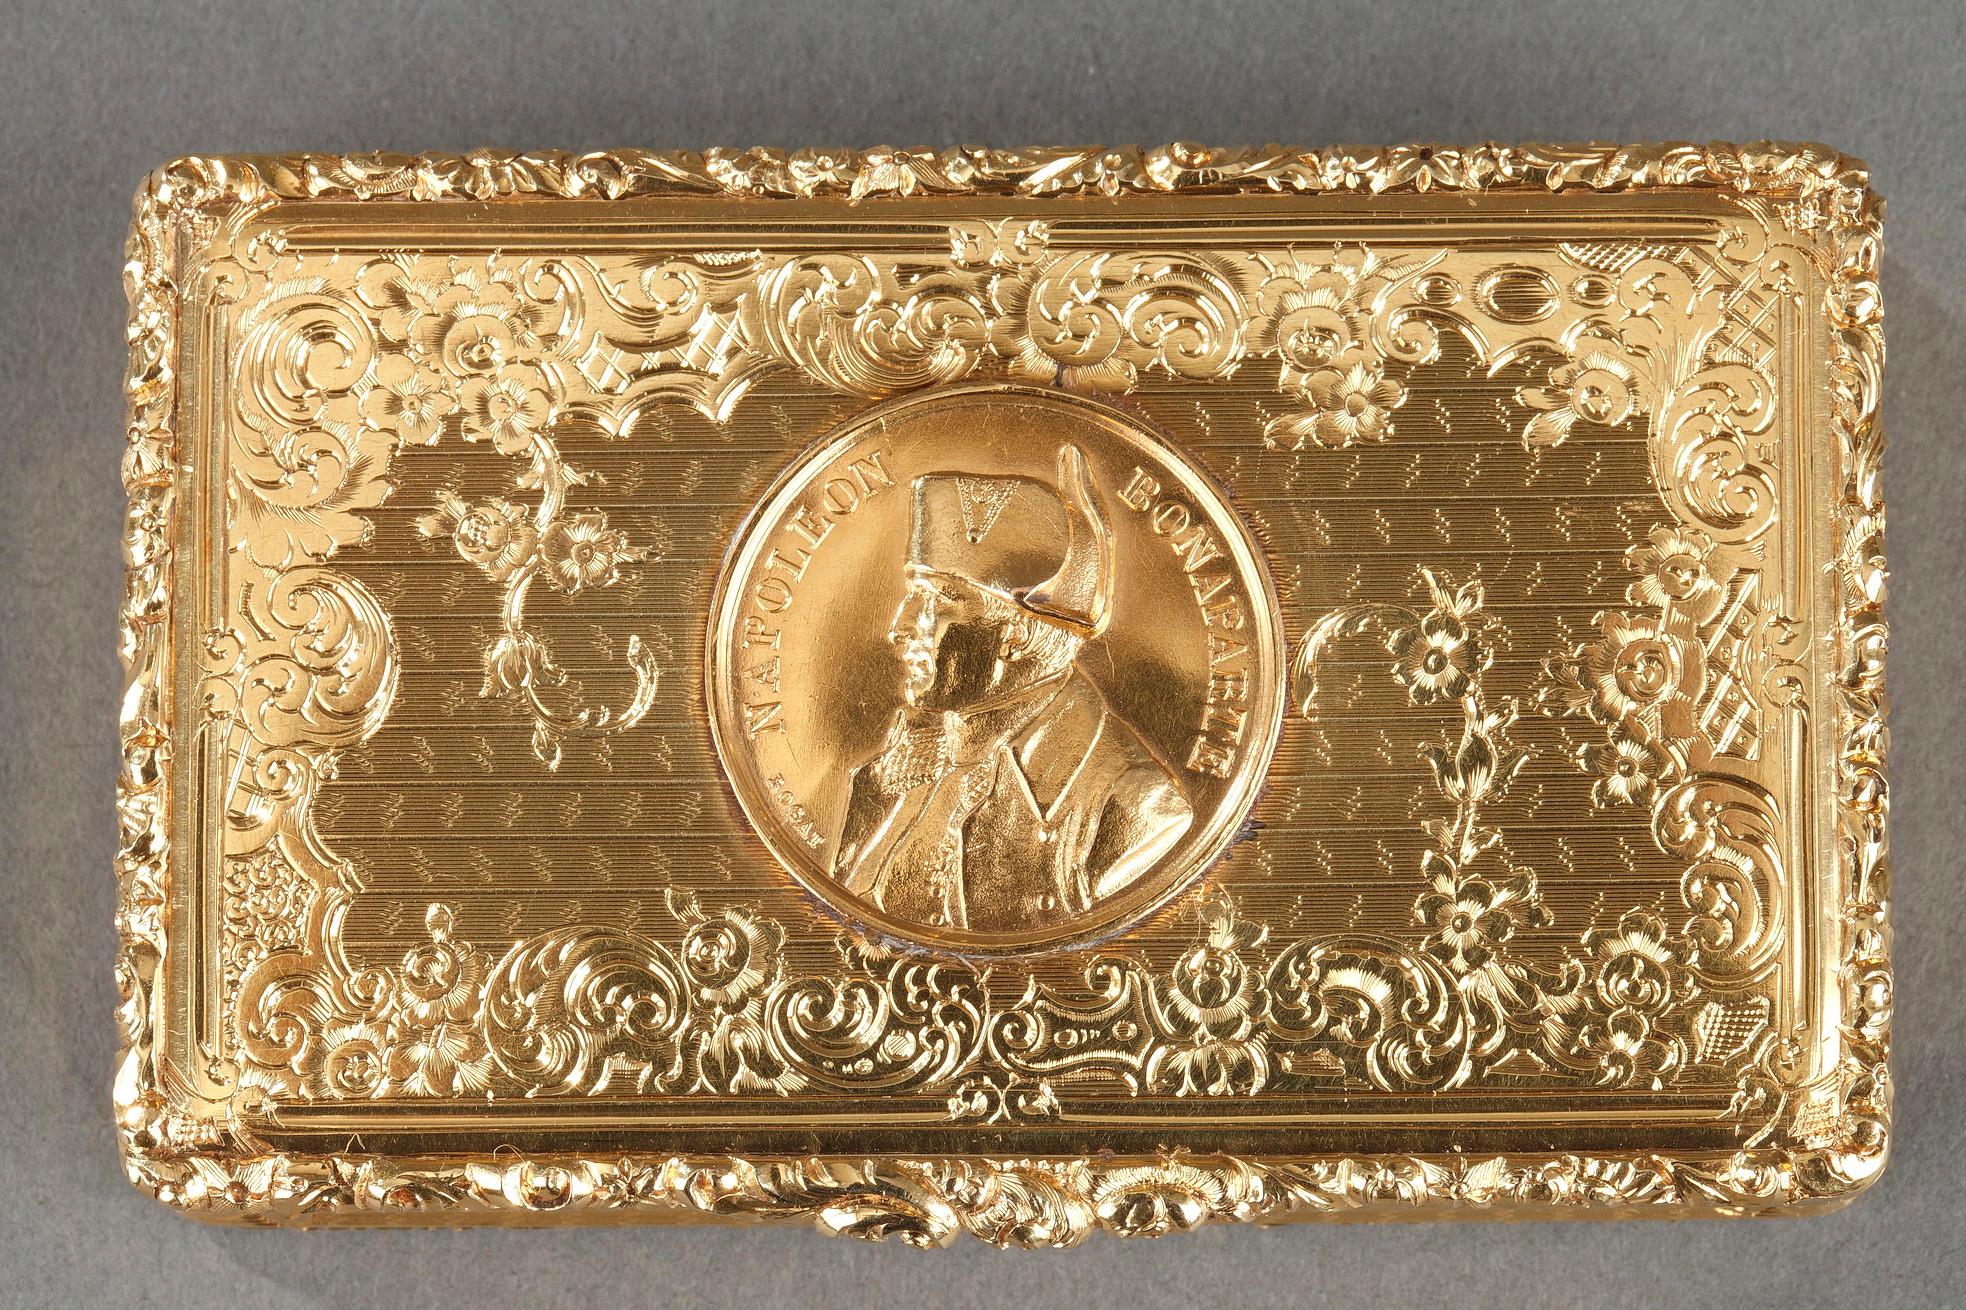 Gold box or snuffbox in chased gold with leaf foliage patterns and floral friezes. The hinged lid is decorated with a Rogat medallion representing the profile of Napoleon Bonaparte: 